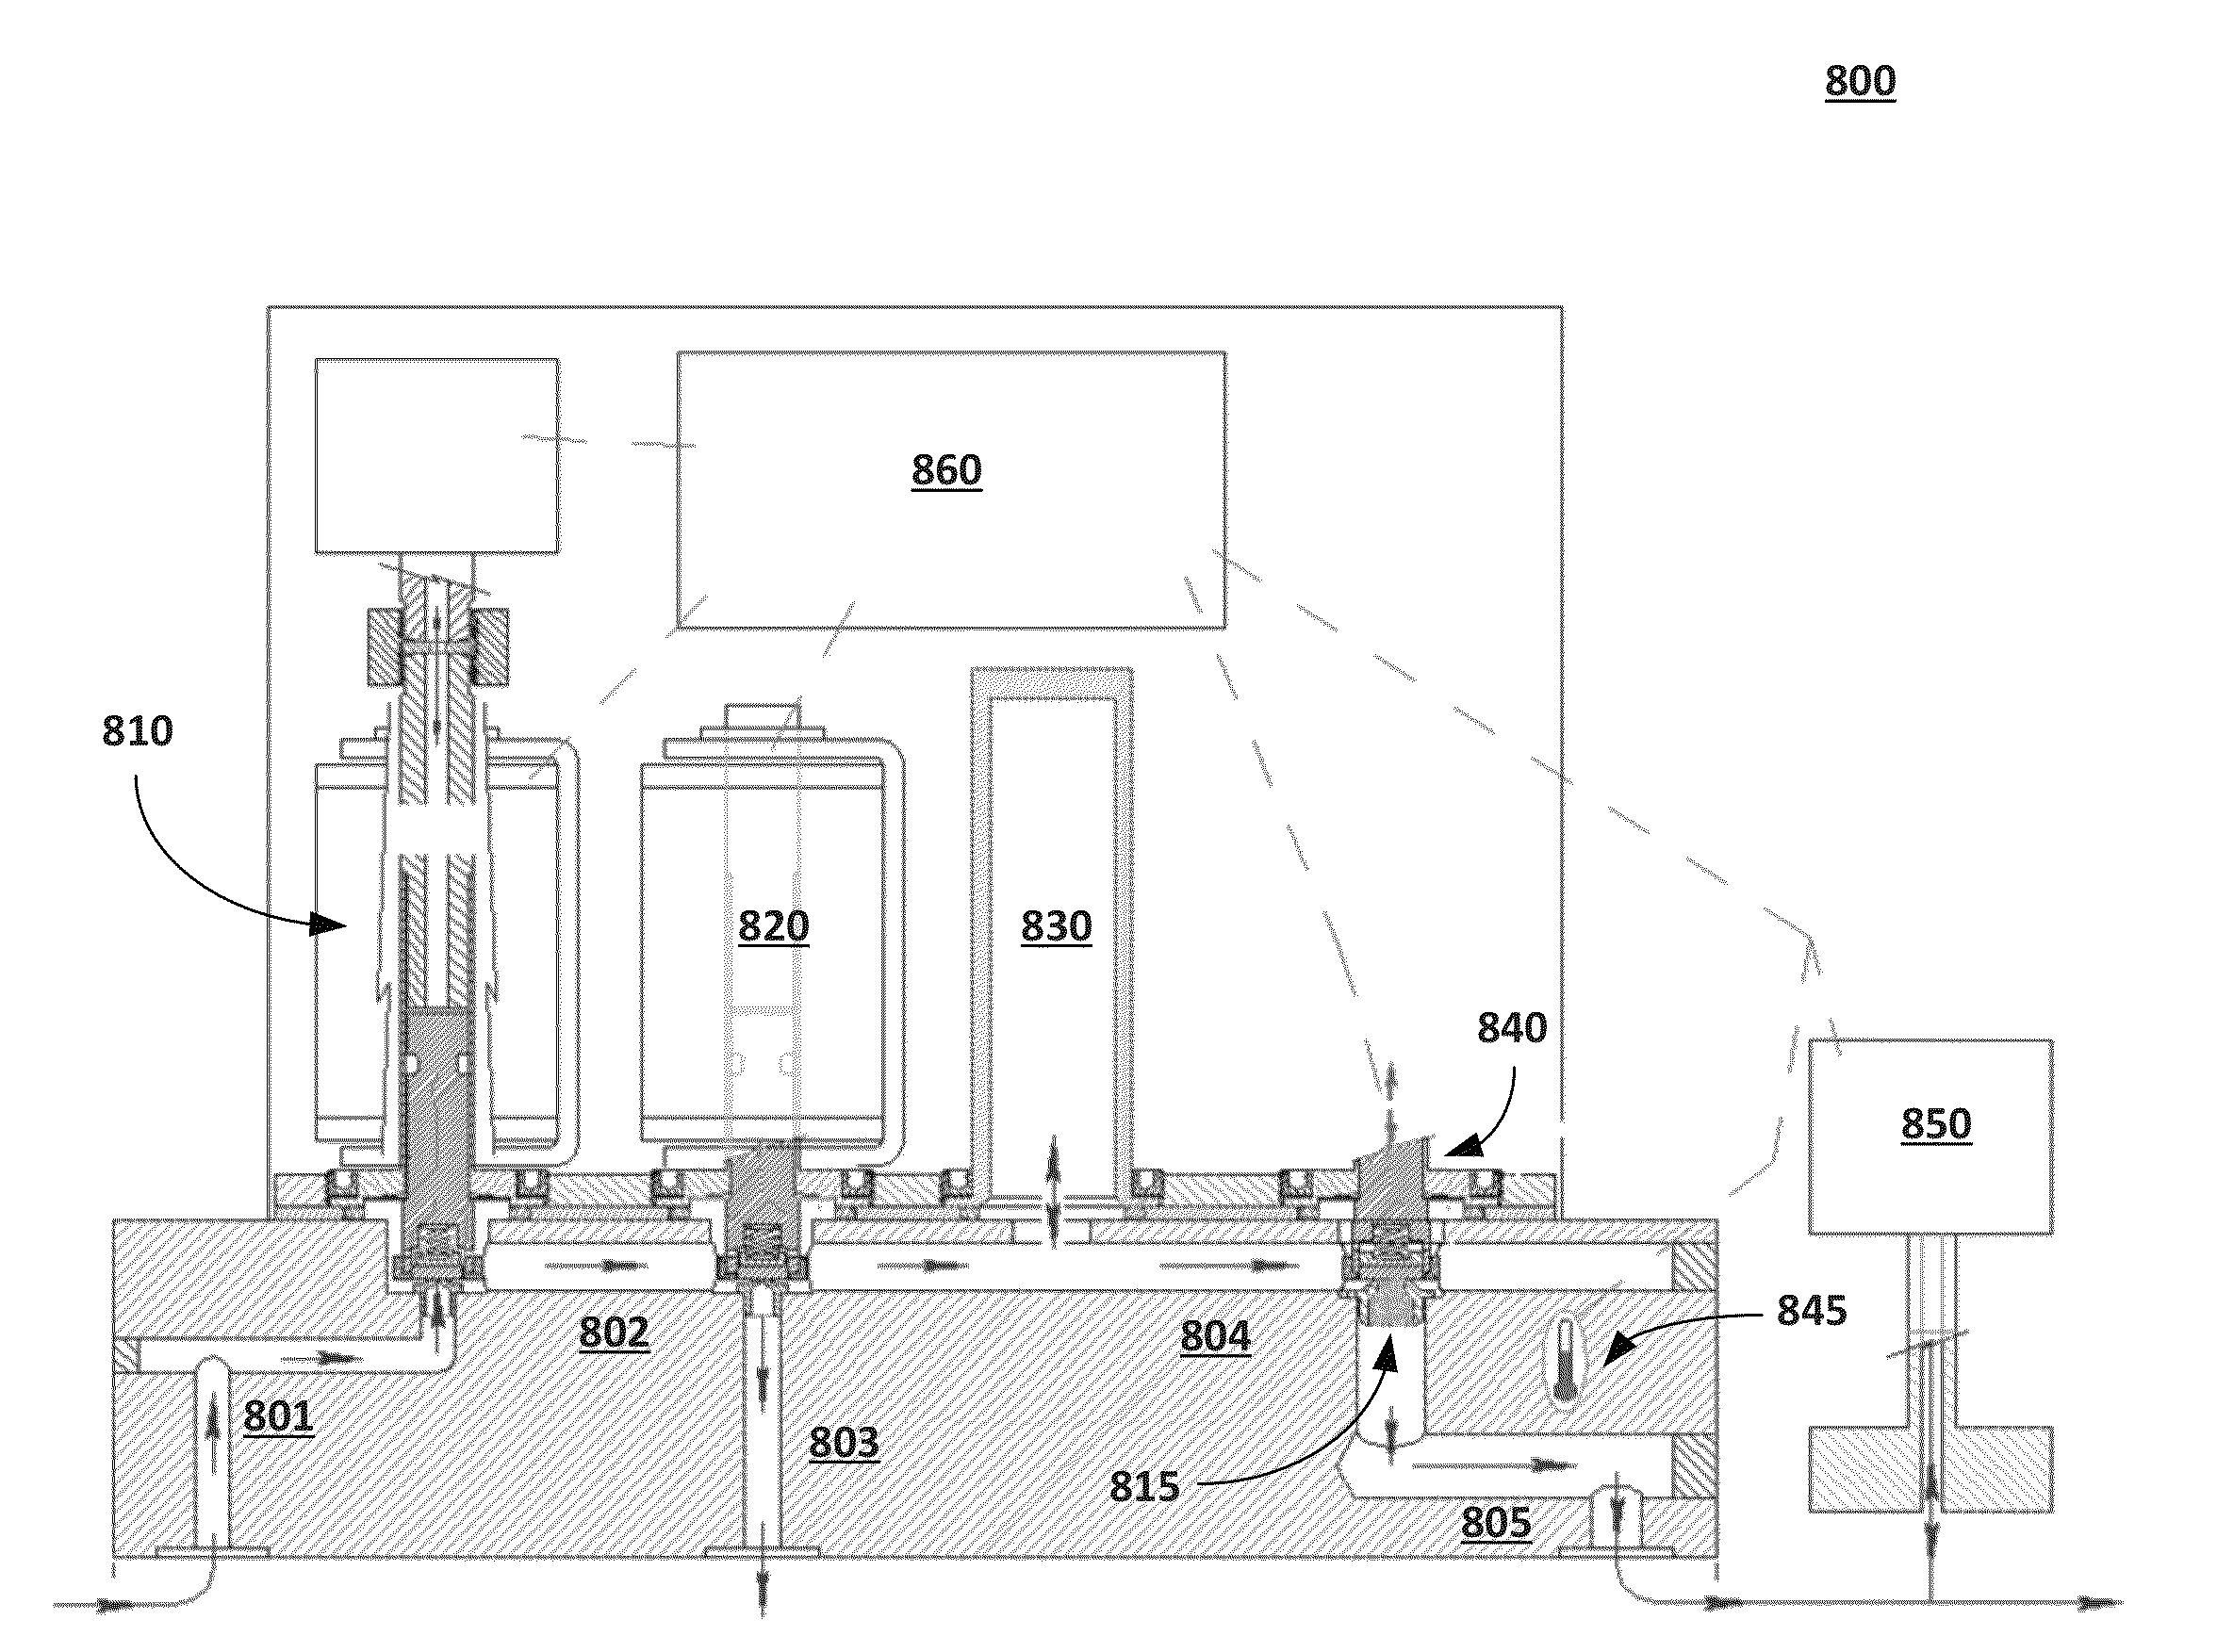 Gas delivery system for outputting fast square waves of process gas during semiconductor processing